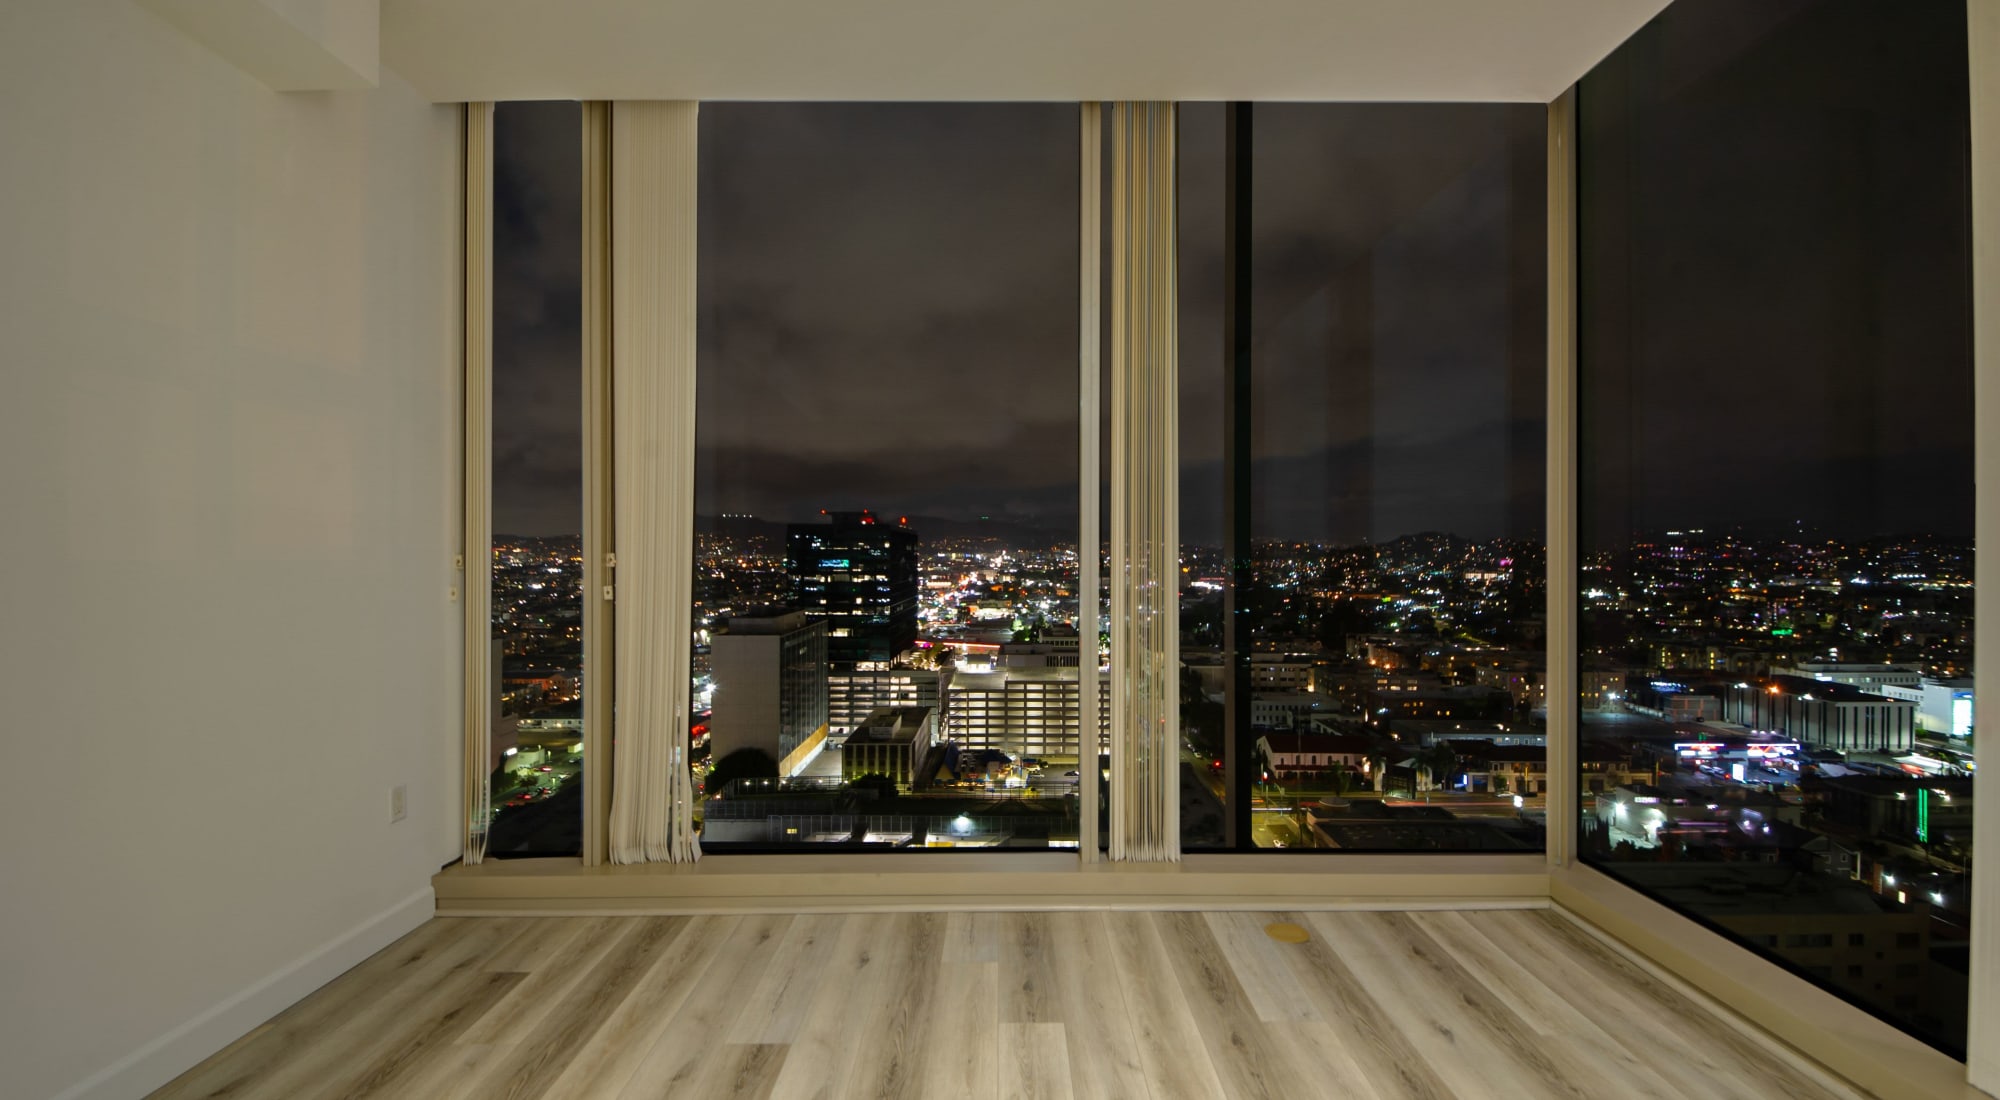 Wood-style flooring and floor to ceiling windows at The Vermont in Los Angeles, California